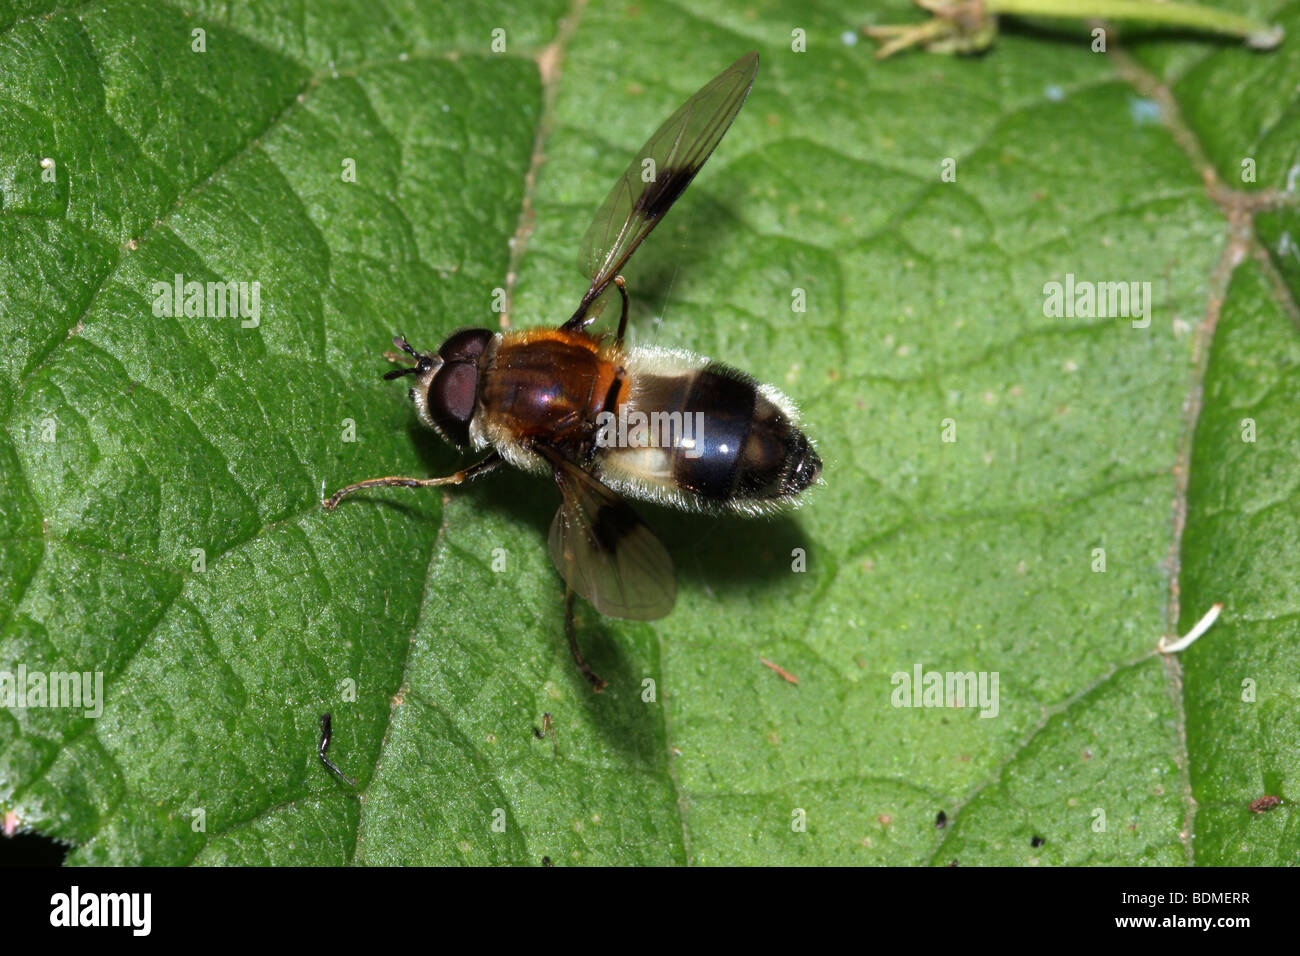 White-belted fleck hover fly (Lucozona lucorum : Syrphidae) grooming its wings with its back legs, UK. Stock Photo